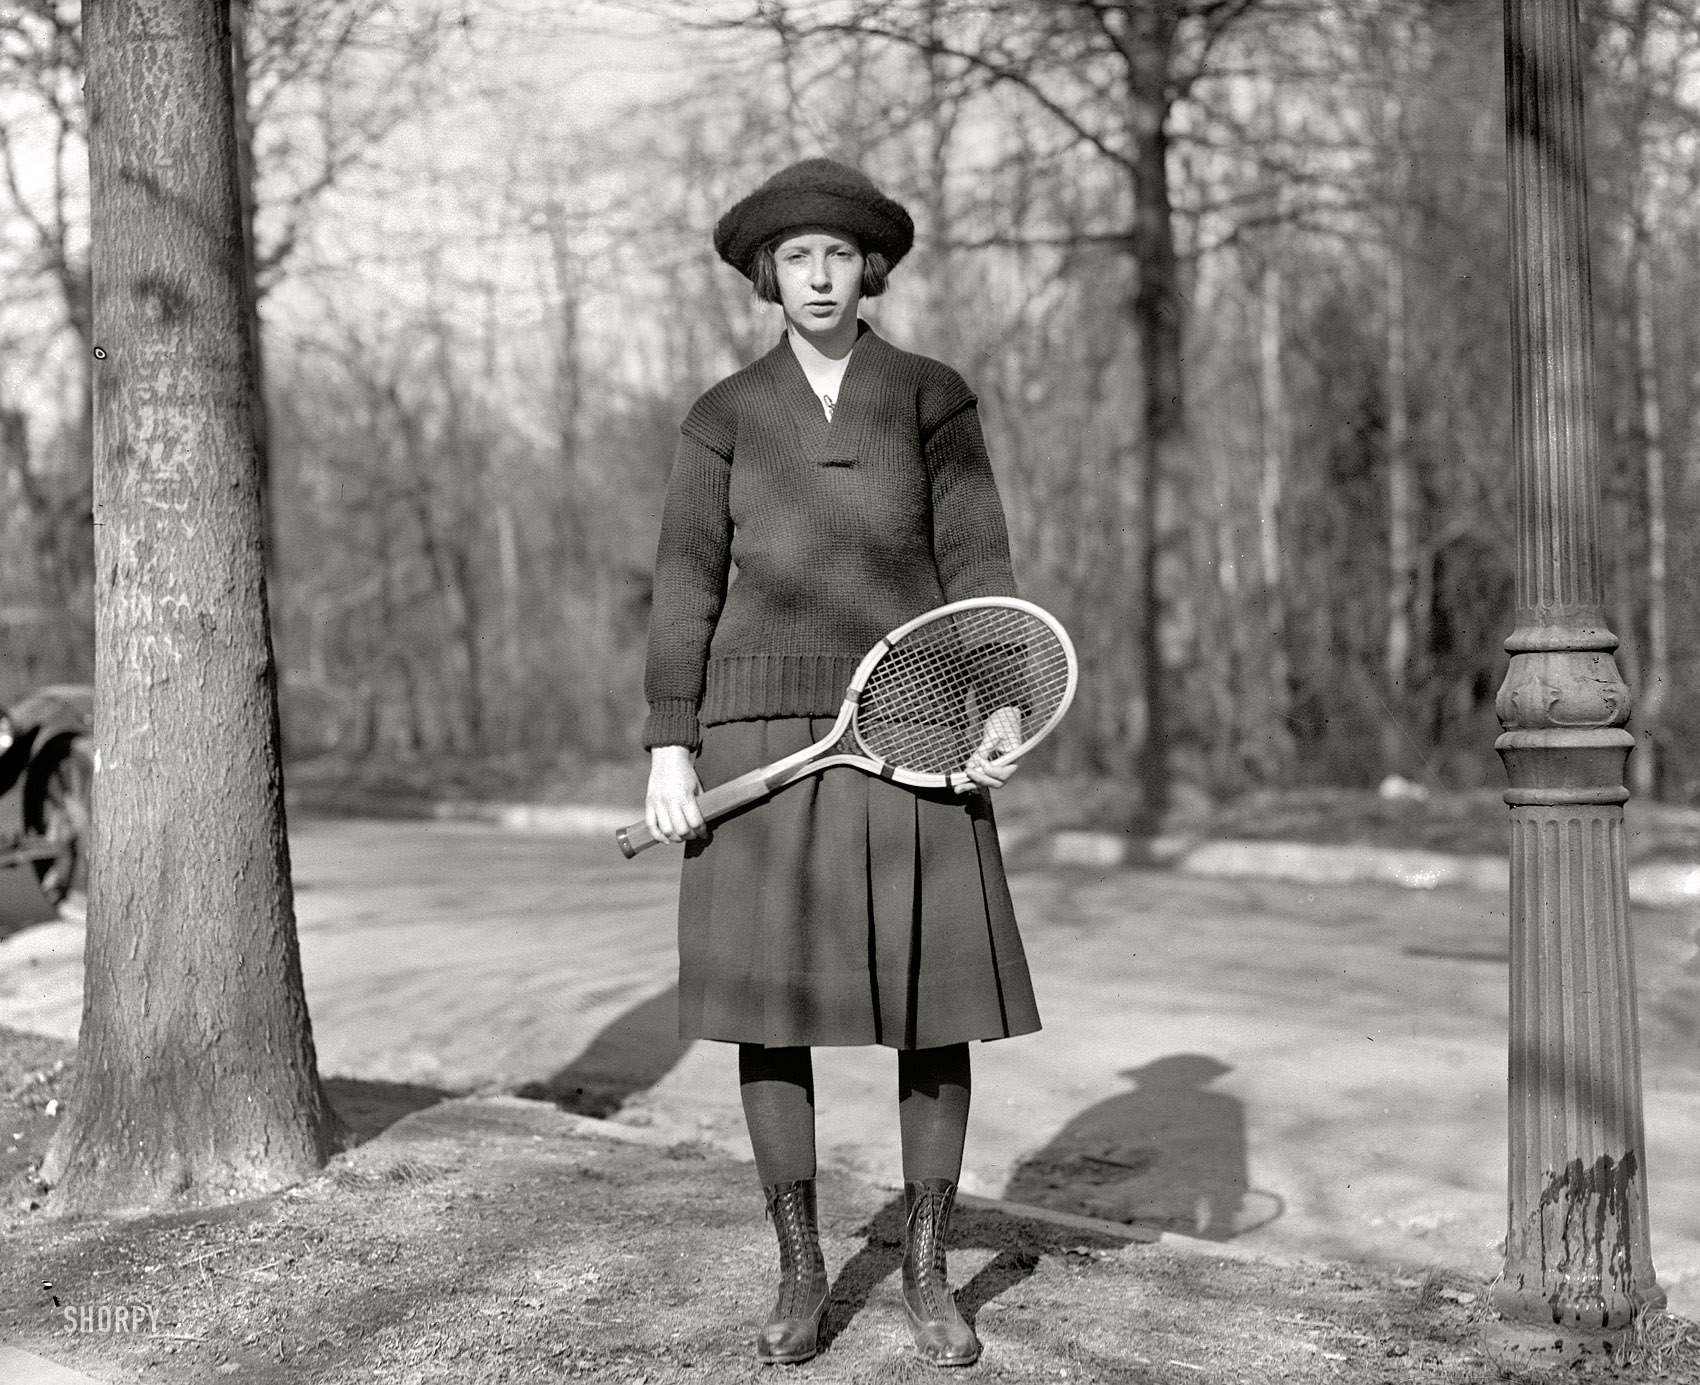 Nov. 28, 1921. Washington, D.C. "Marion Leech." Daughter of sportsman and tennis impresario Abner Y. Leech Jr., and whose fans evidently could not contain themselves. National Photo Co. Collection glass negative. View full size.